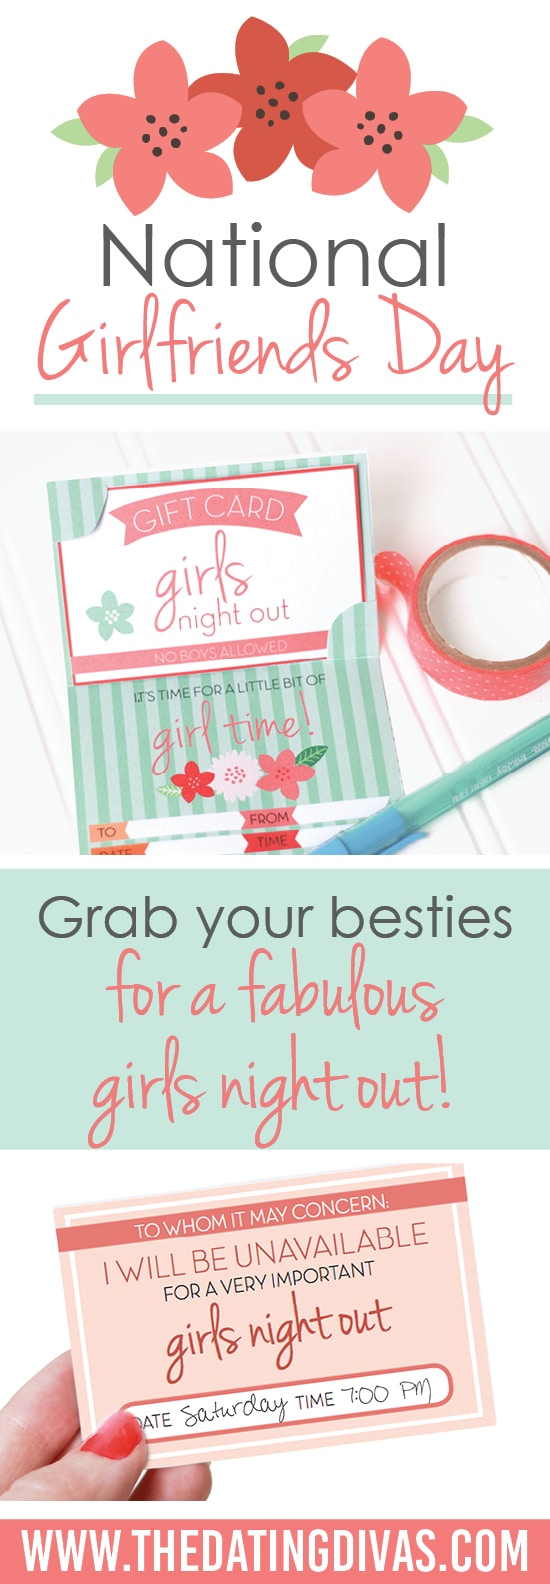 National Girlfriends Day greeting card